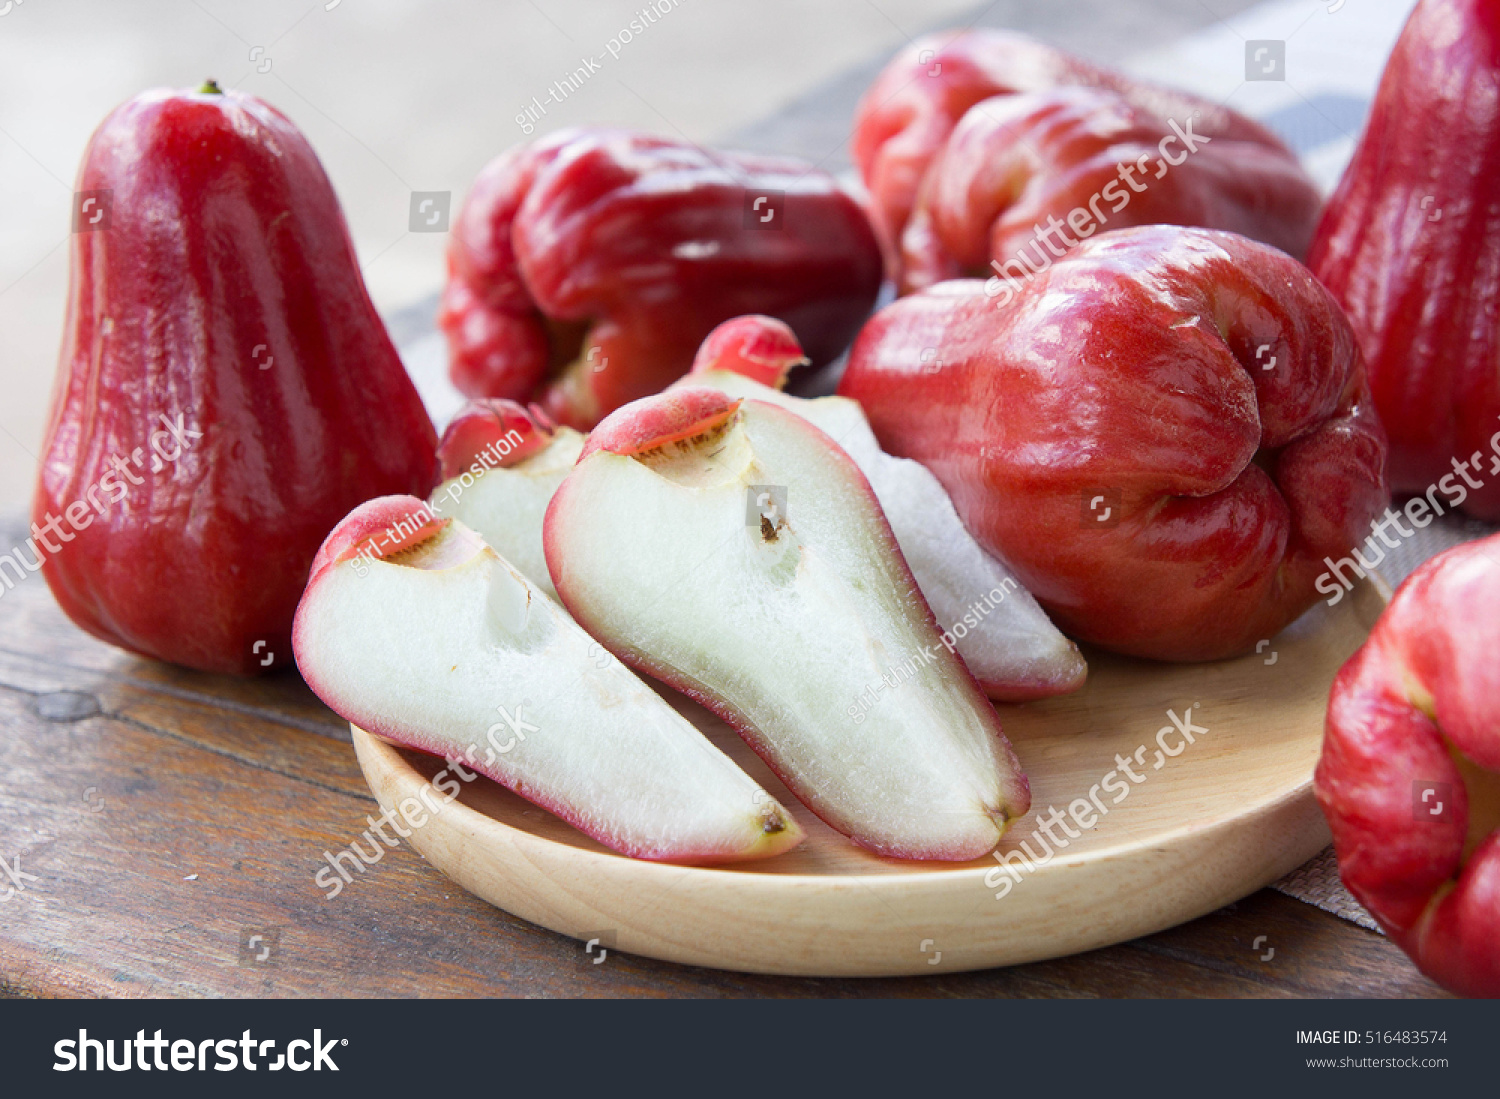 rose apple , Thailand apple fruit flavors of sweet red gloss.  rose apple on background #516483574